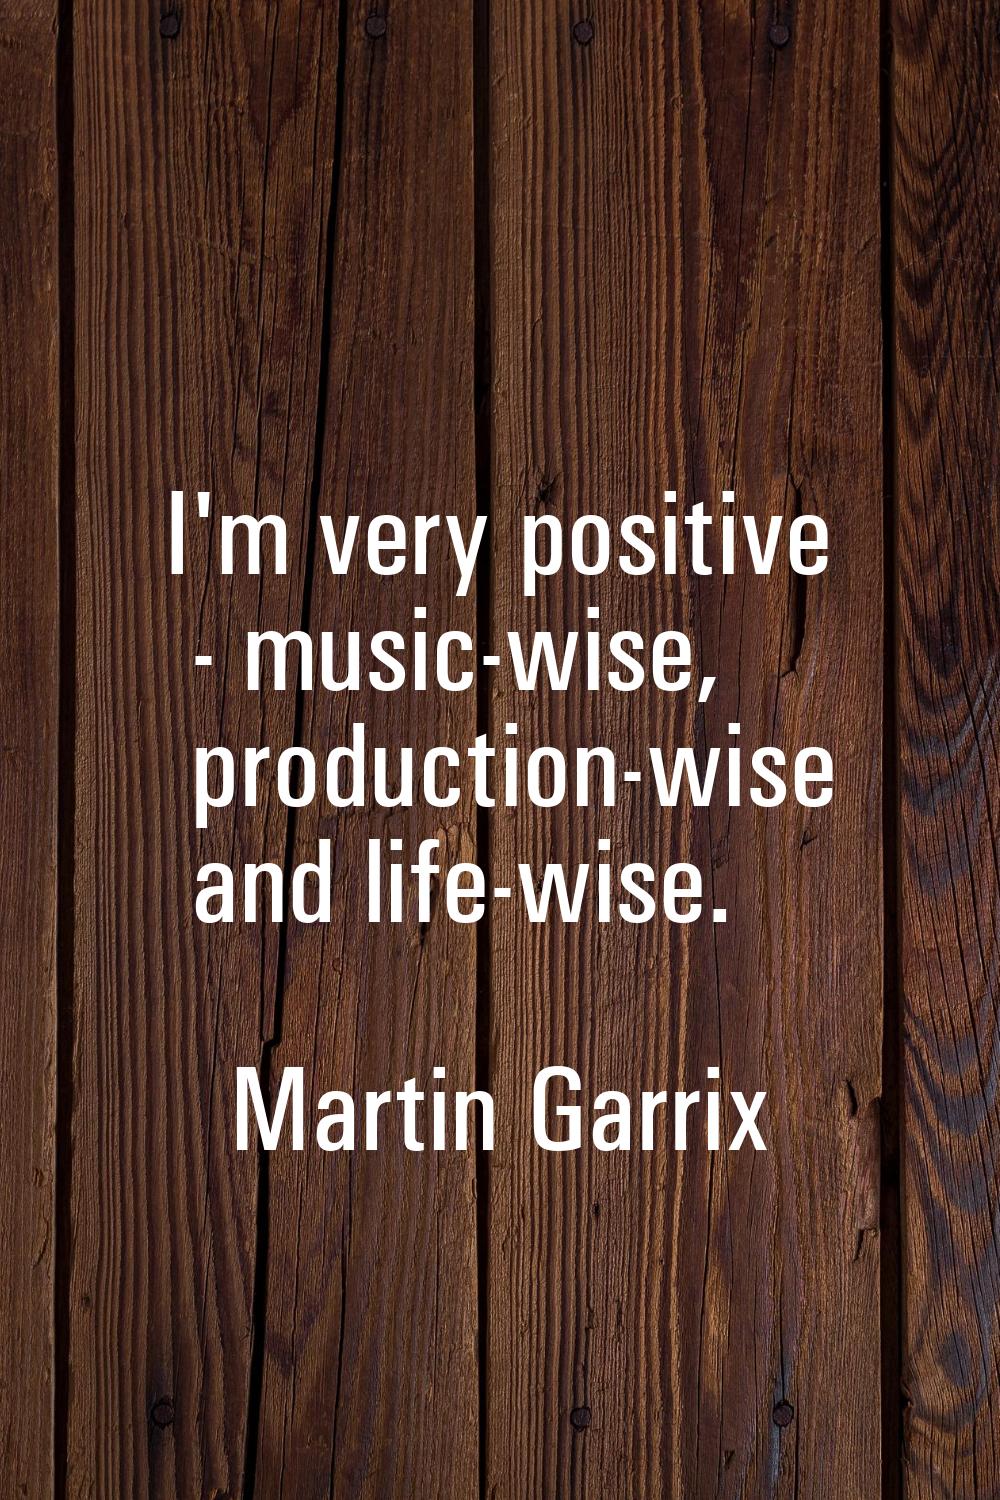 I'm very positive - music-wise, production-wise and life-wise.